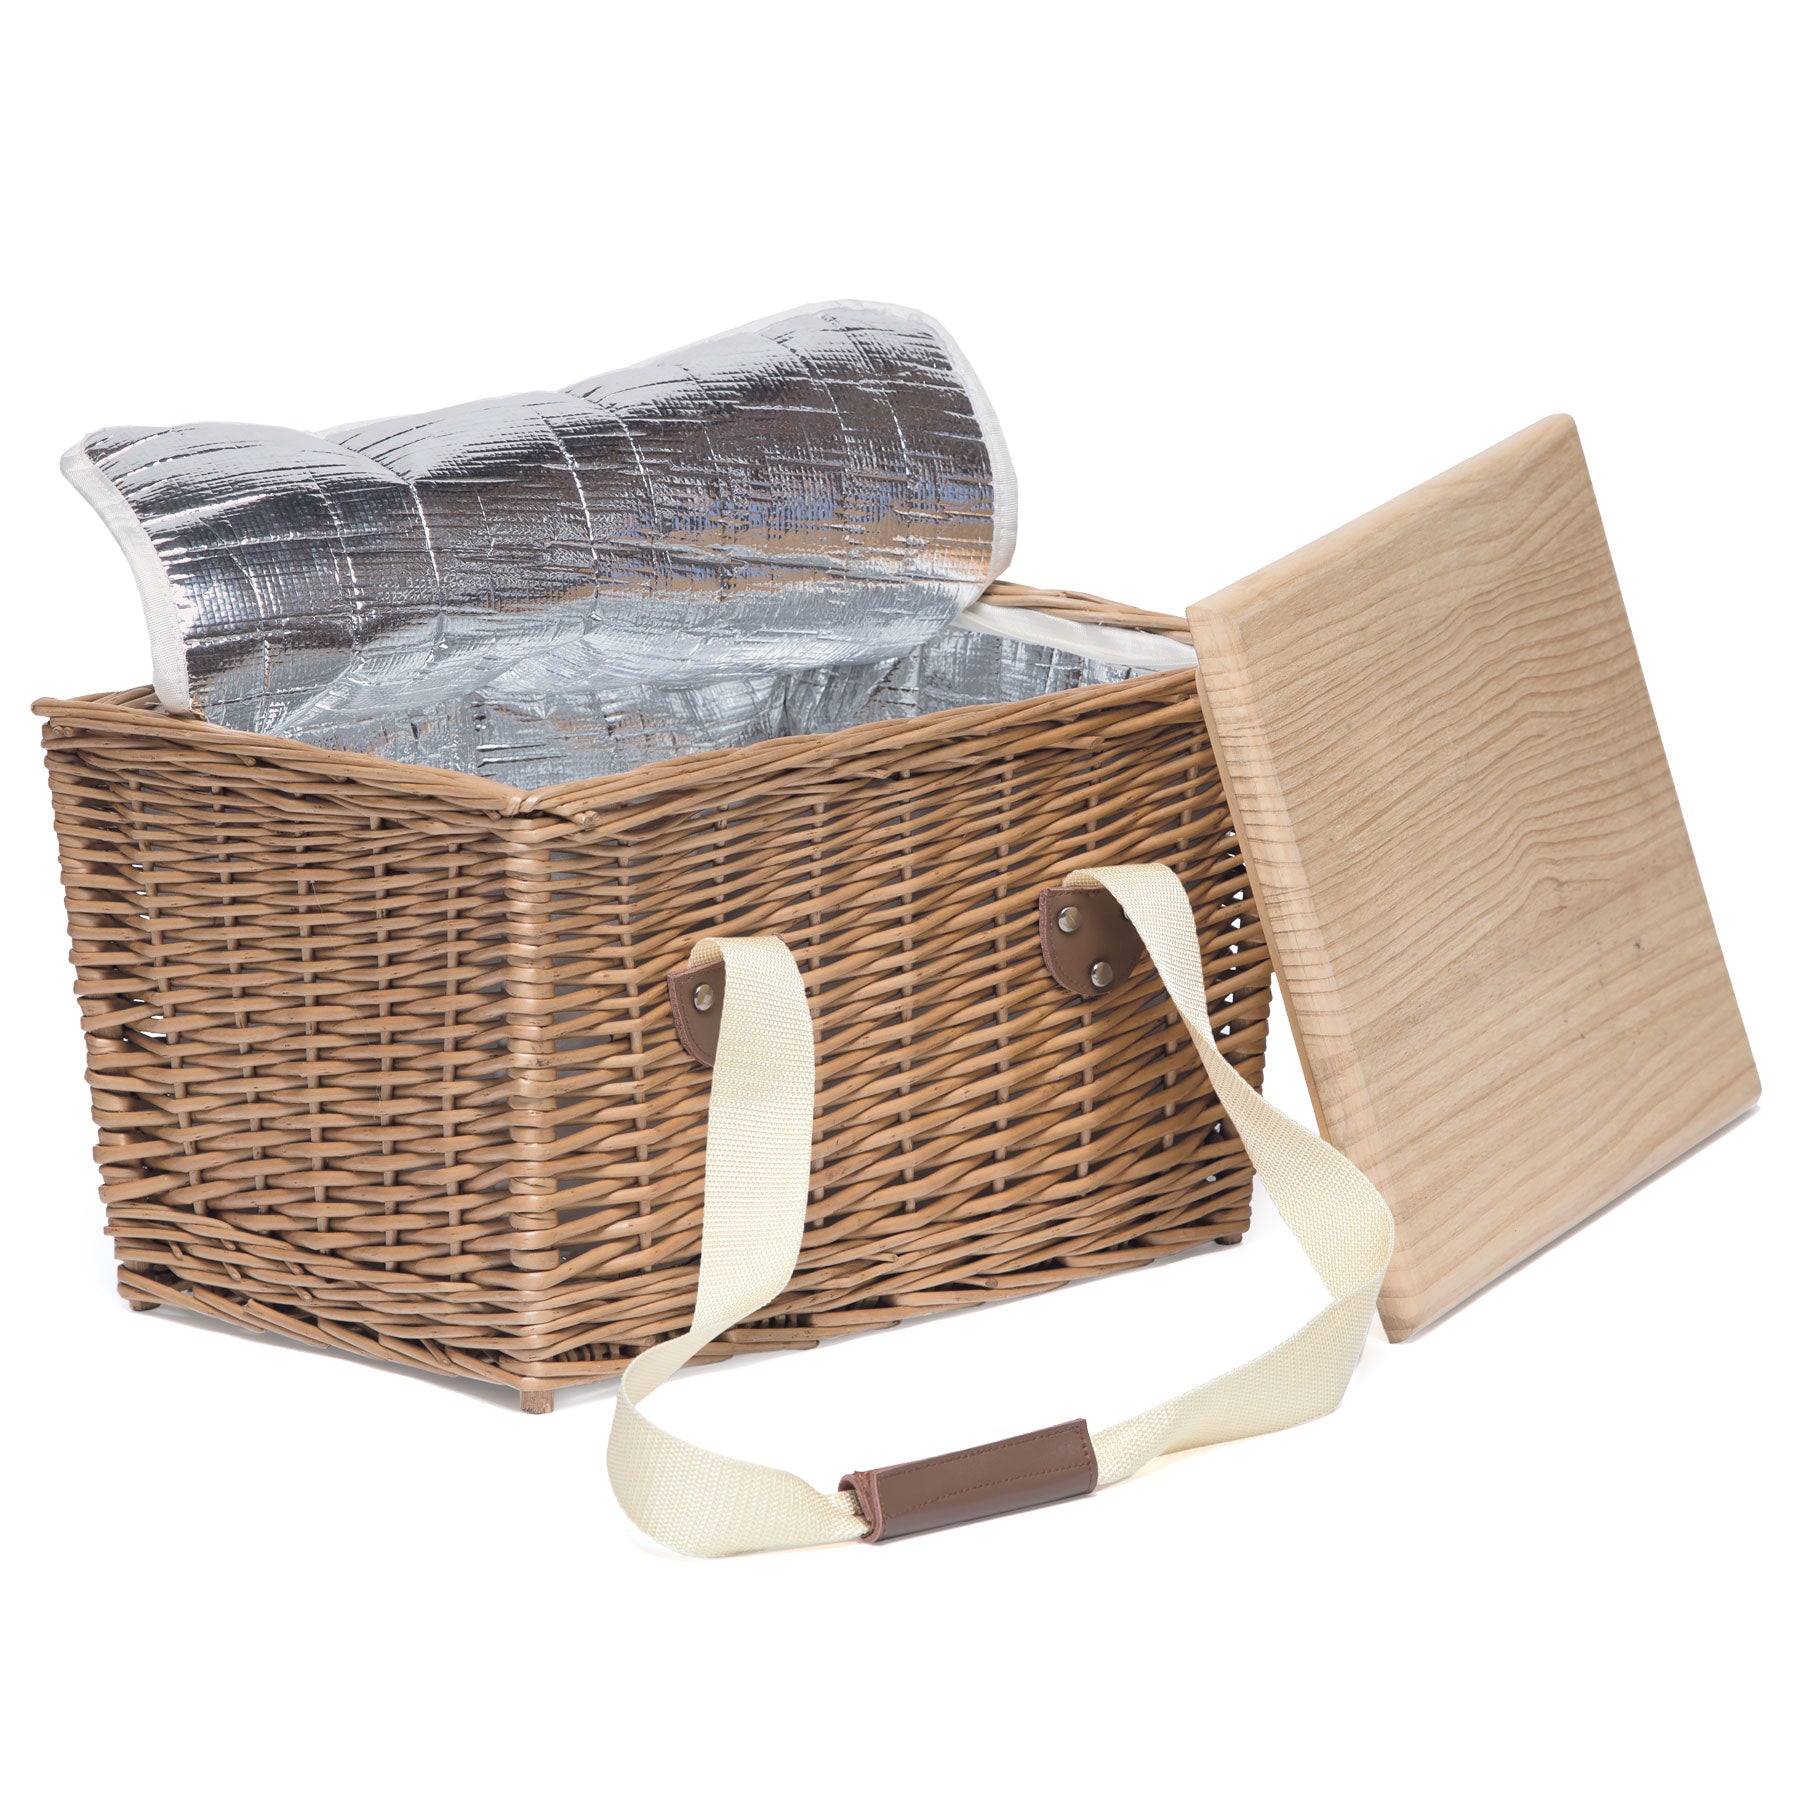 handmade wicker picnic basket opened to show internal insulation and timber board lid